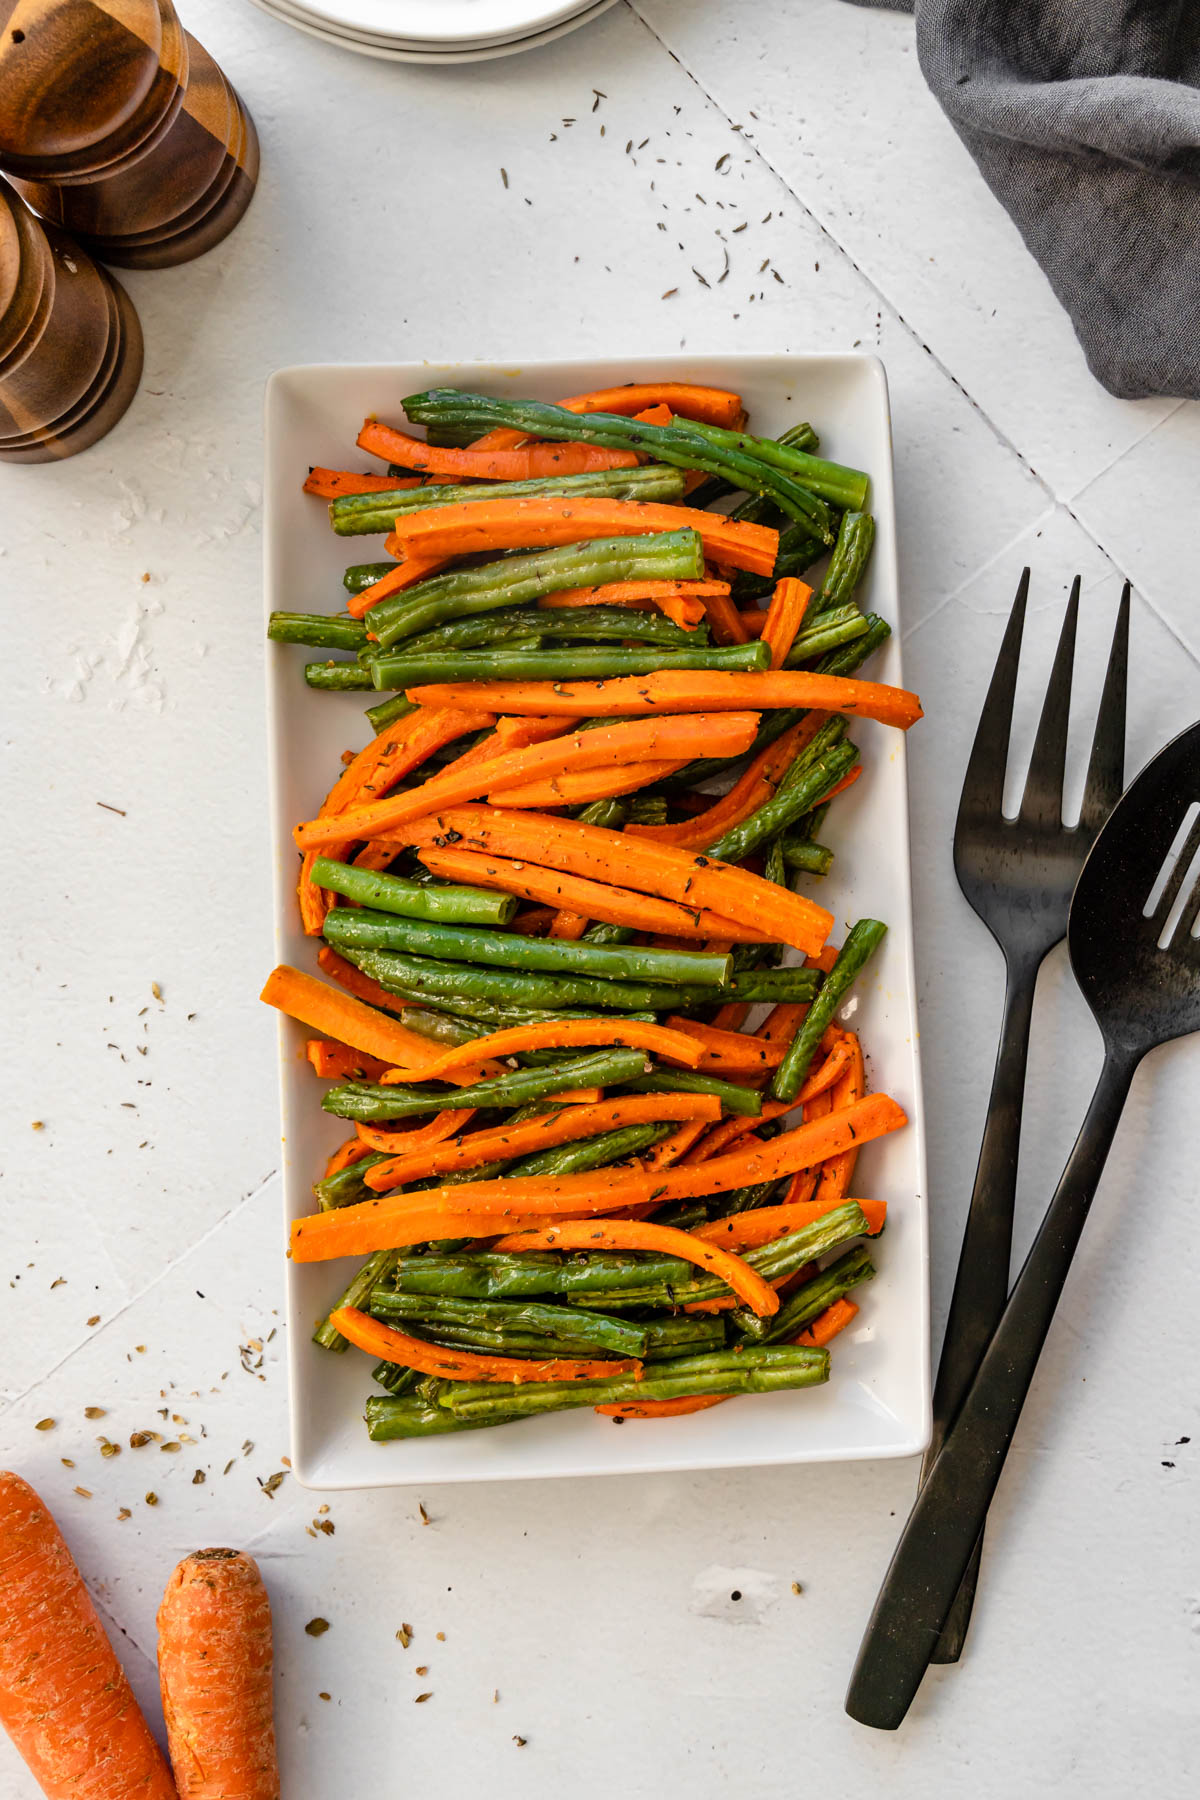 A plate of roasted carrots and green beans with serving utensils on the side.